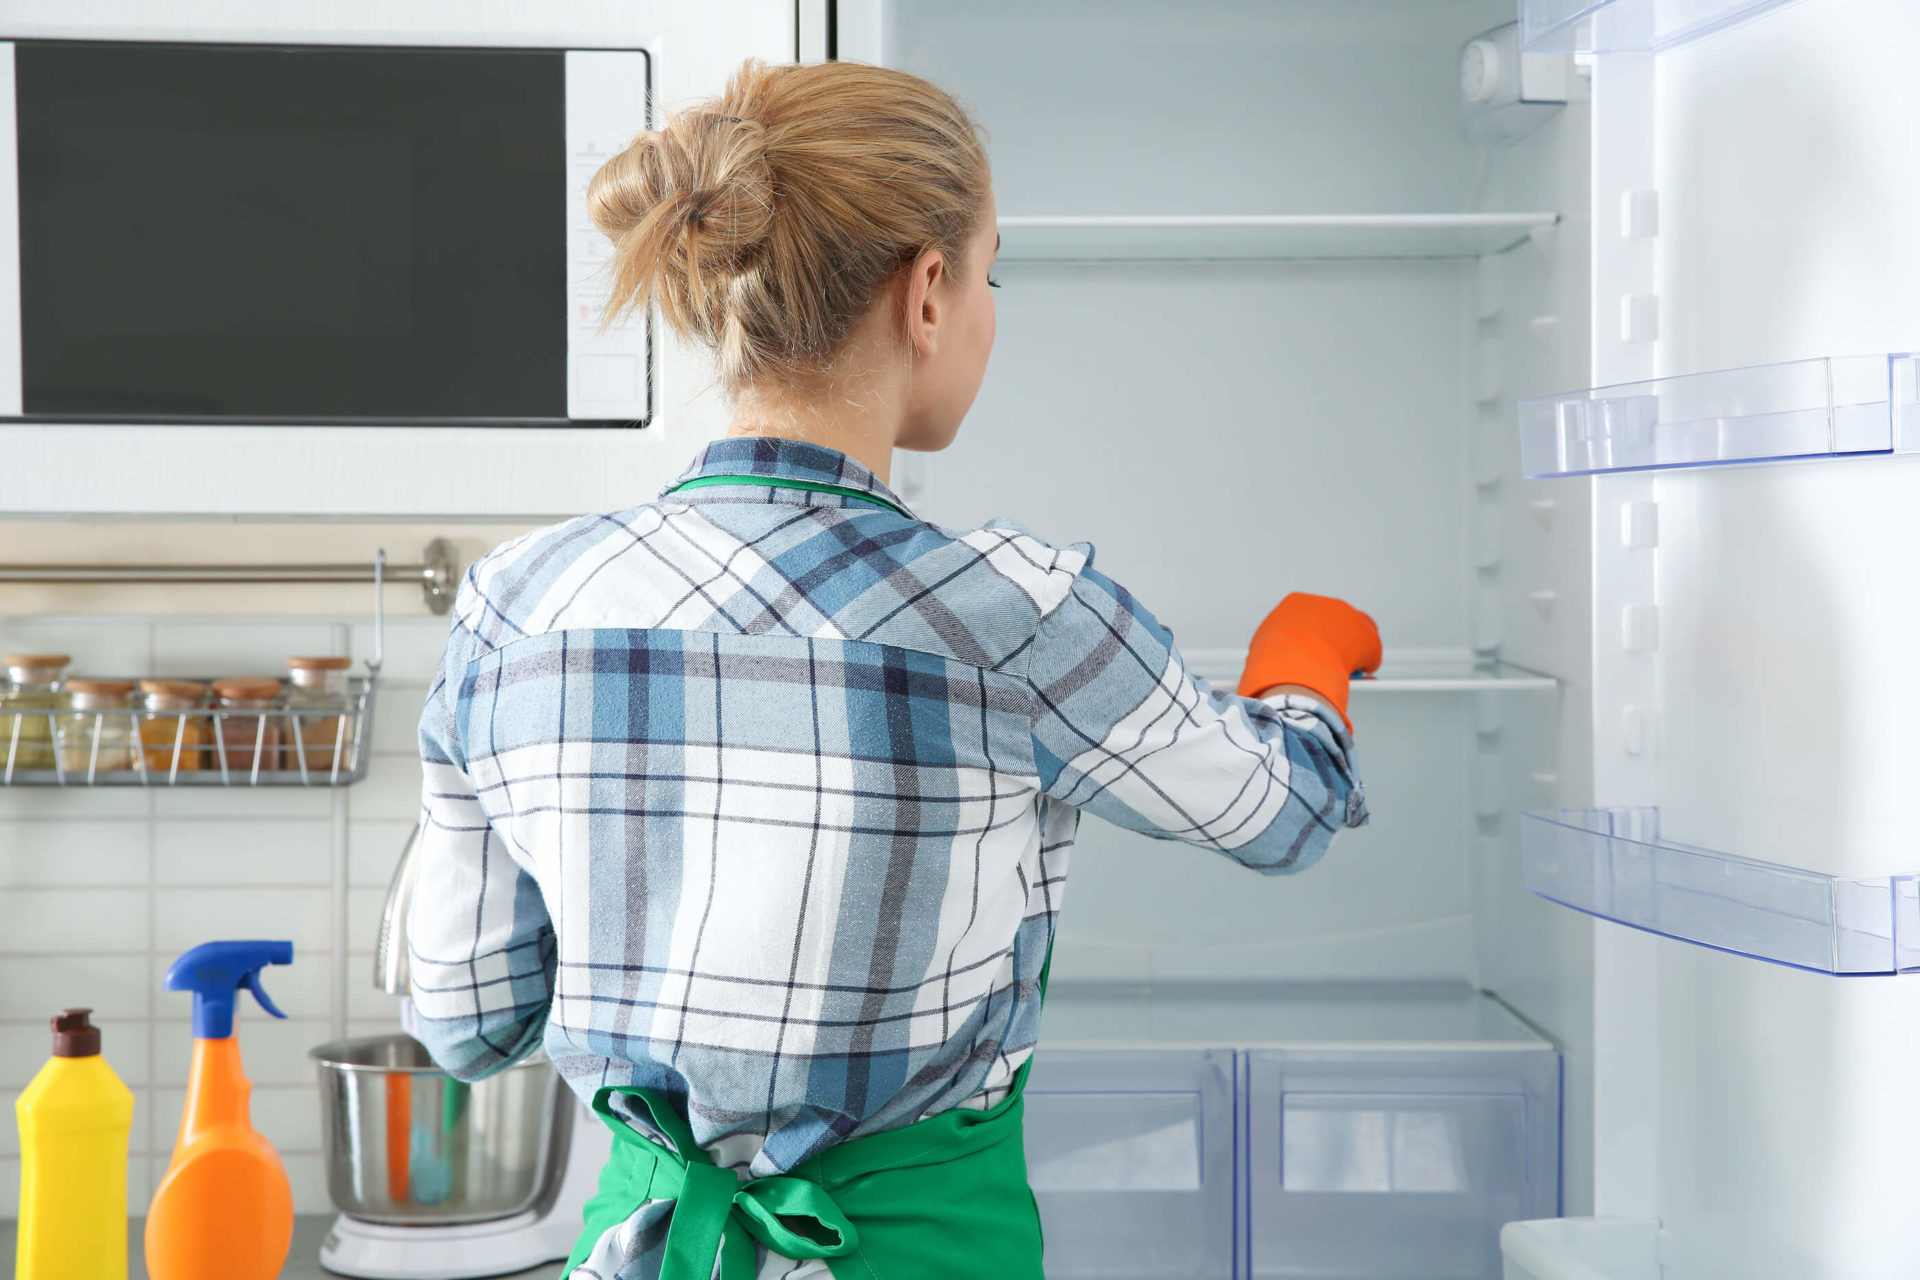 Woman-Gloves-Cleaning-Refrigerator.jpg